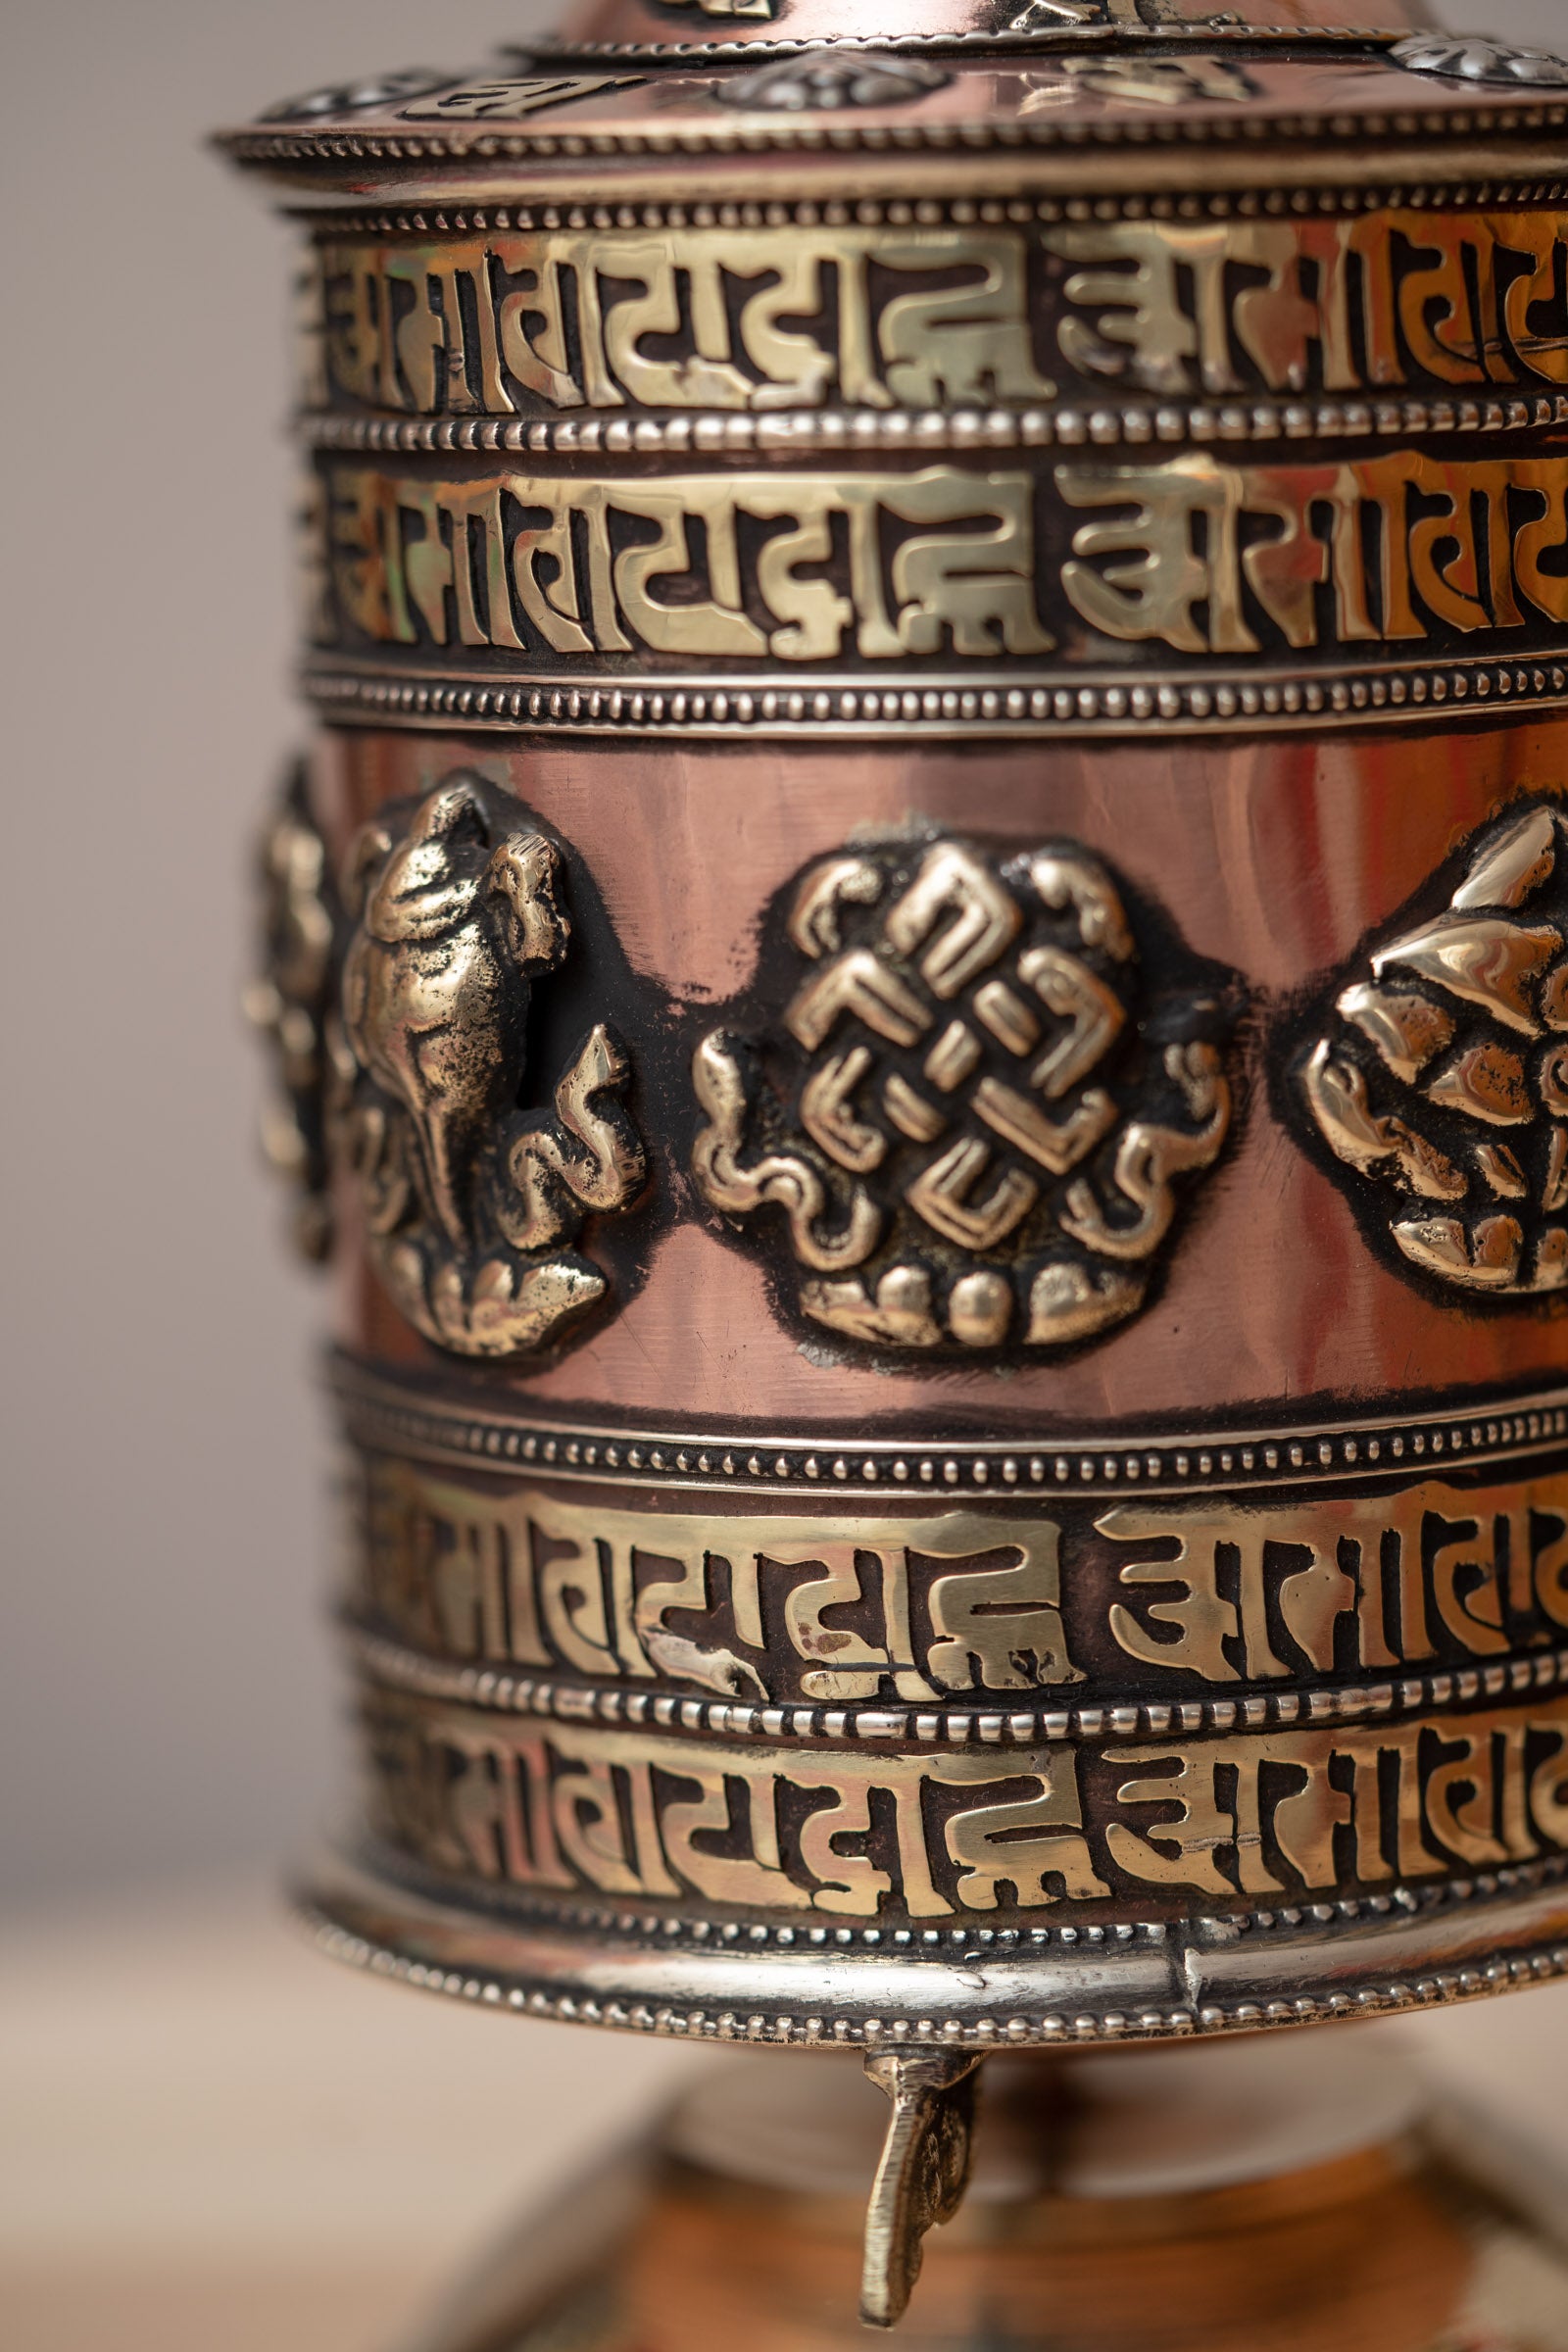  Prayer wheel for Spiritual Connection, Blessings and Well-being.